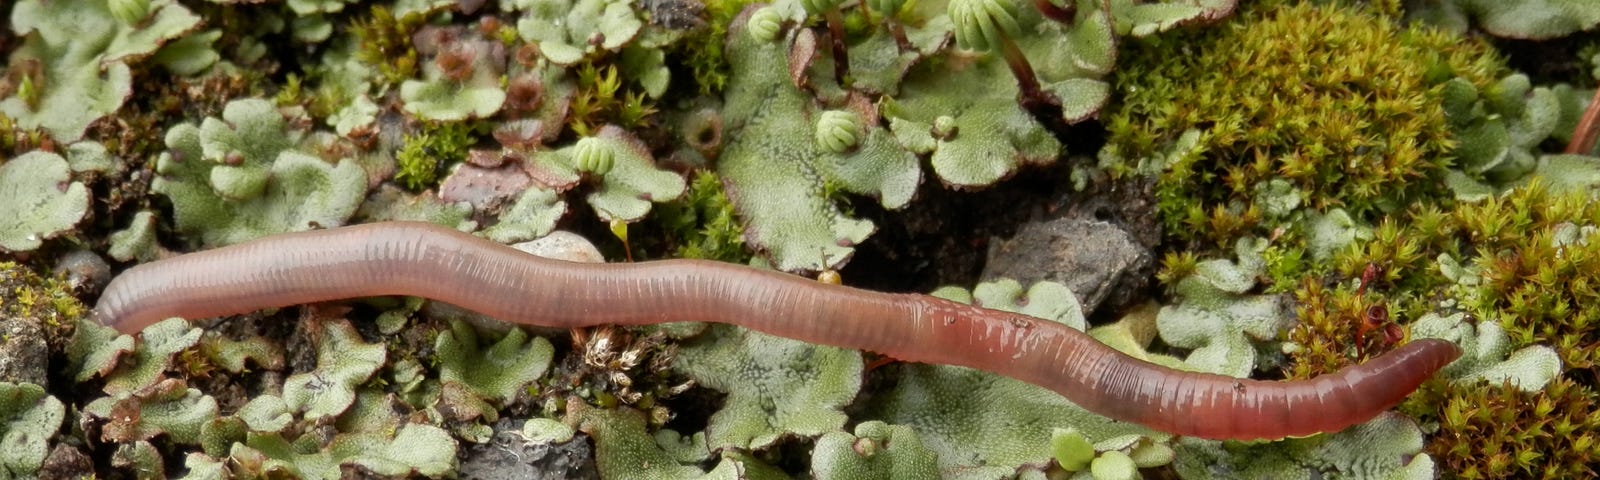 A worm crawls over a bed of moss and plants.